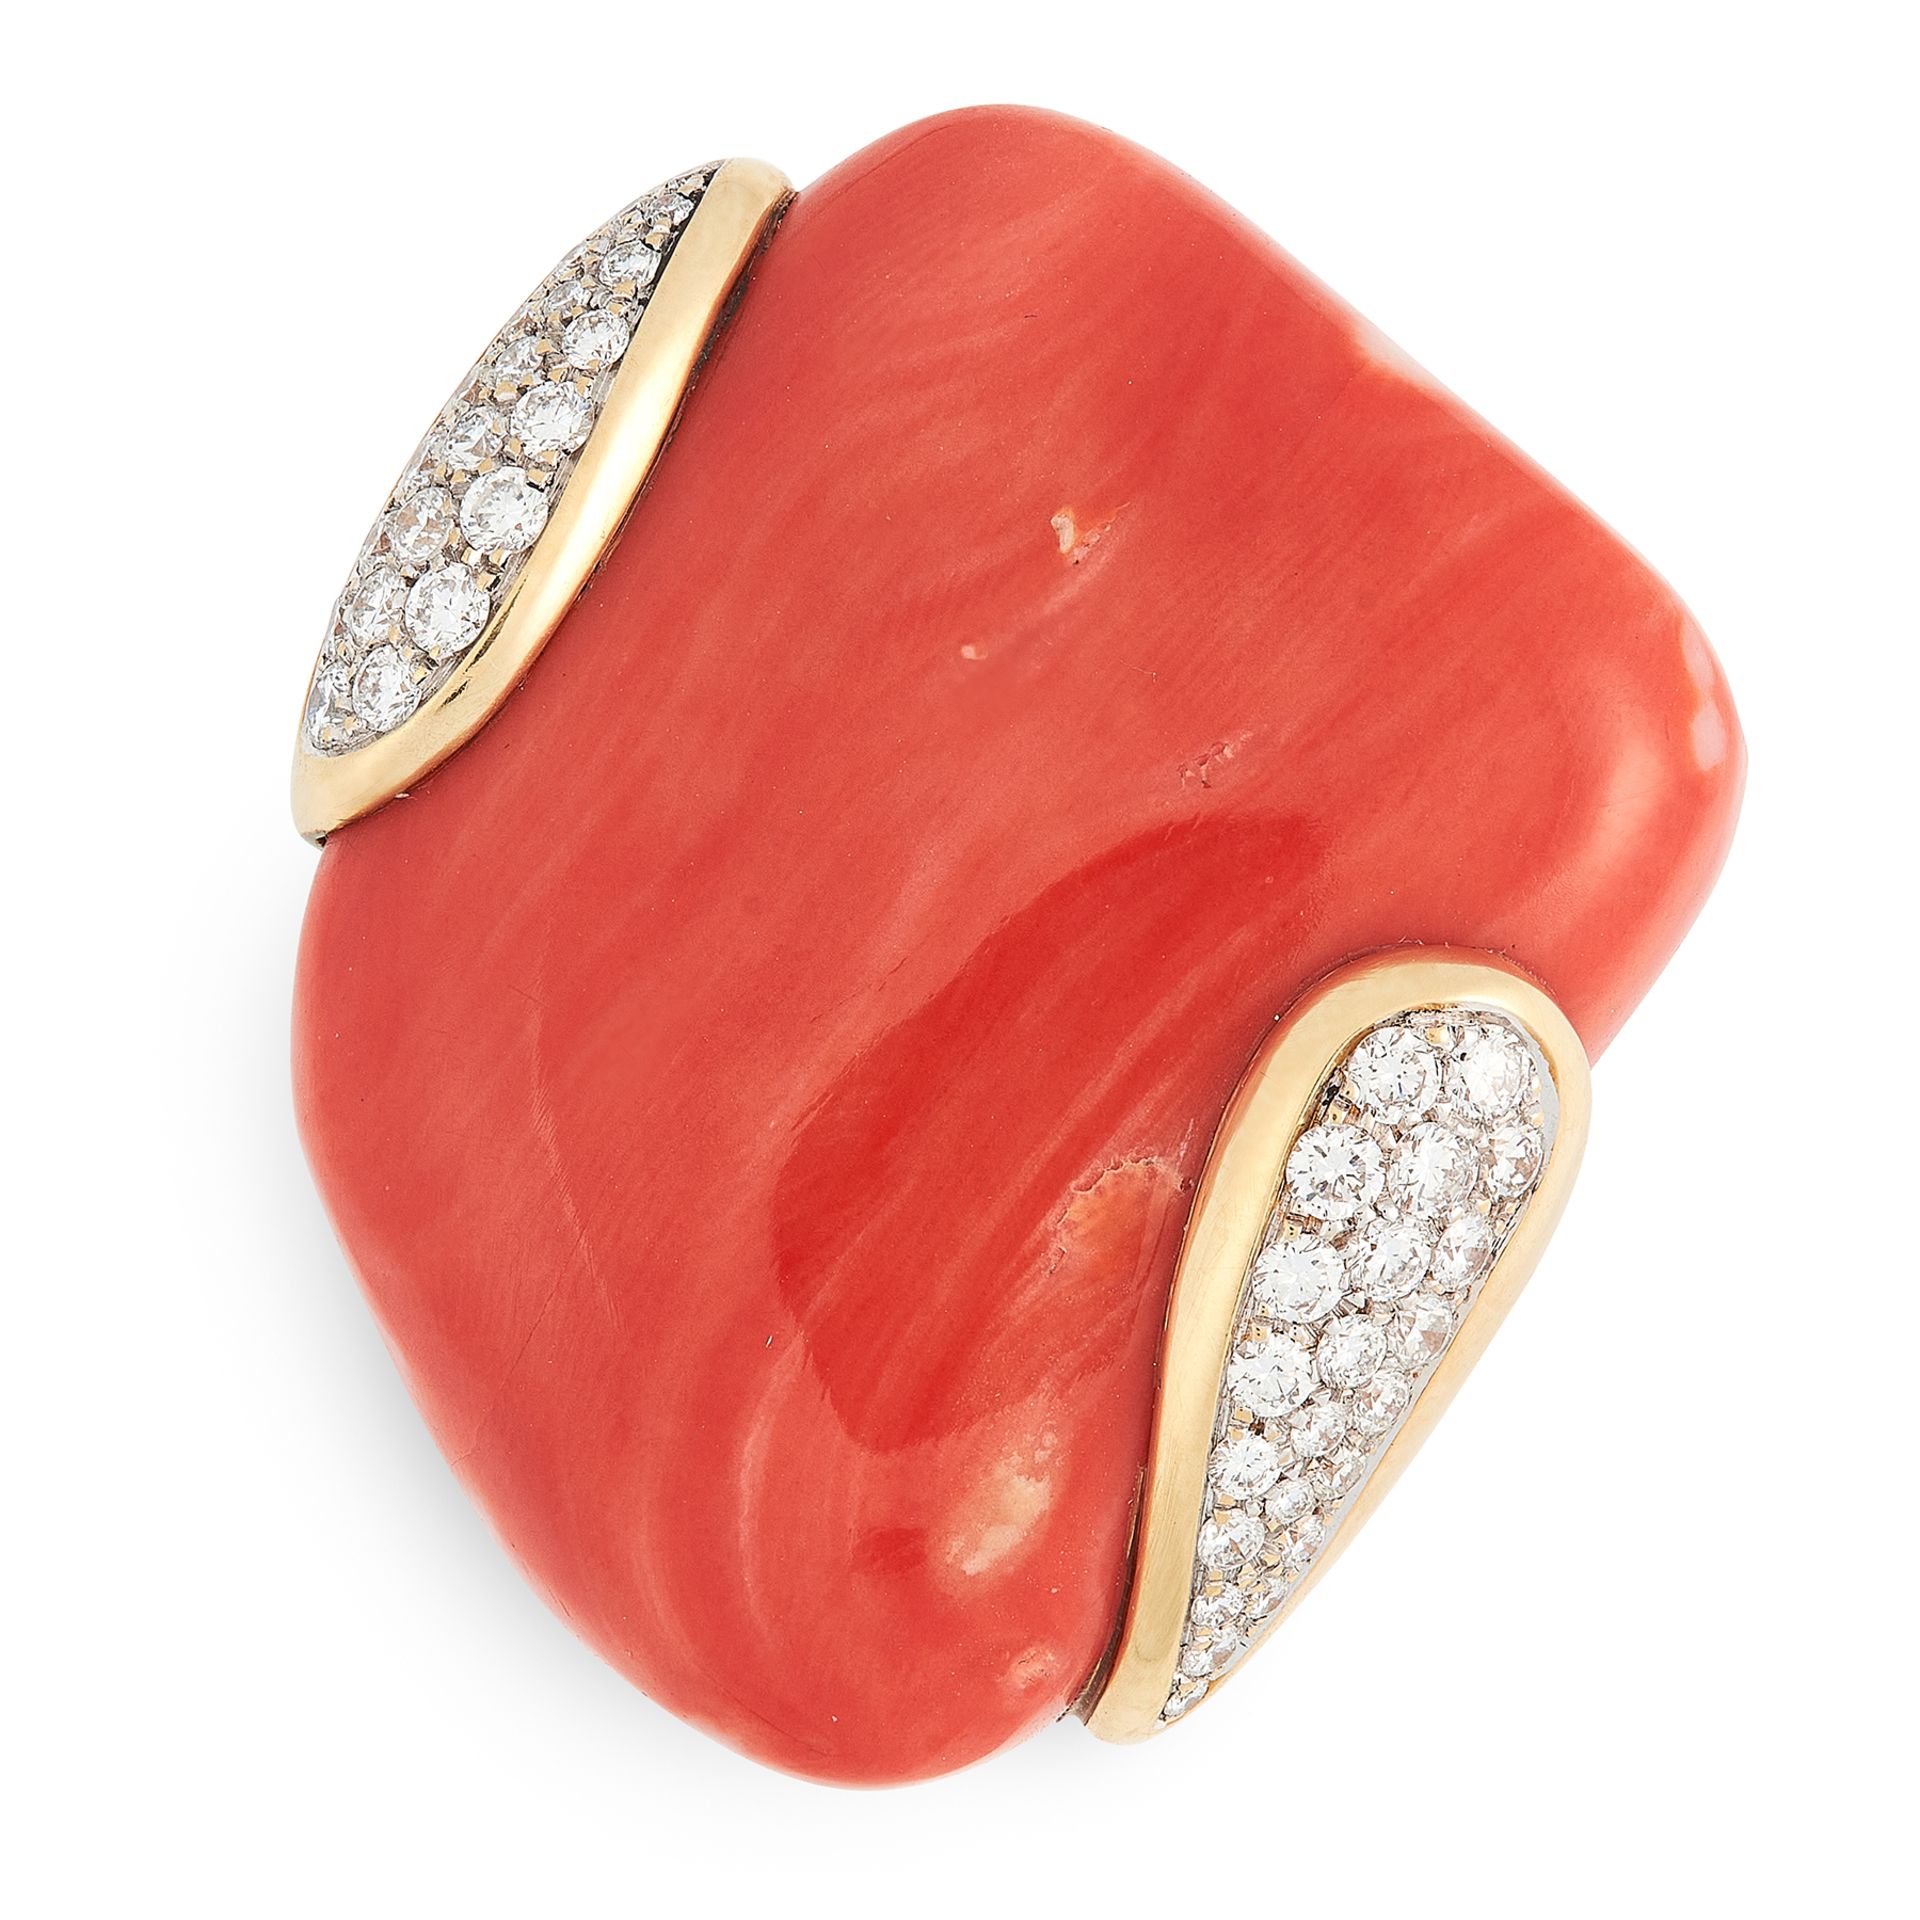 A CORAL AND DIAMOND RING, GAVELLO in 18ct yellow gold, set with a large polished piece of coral